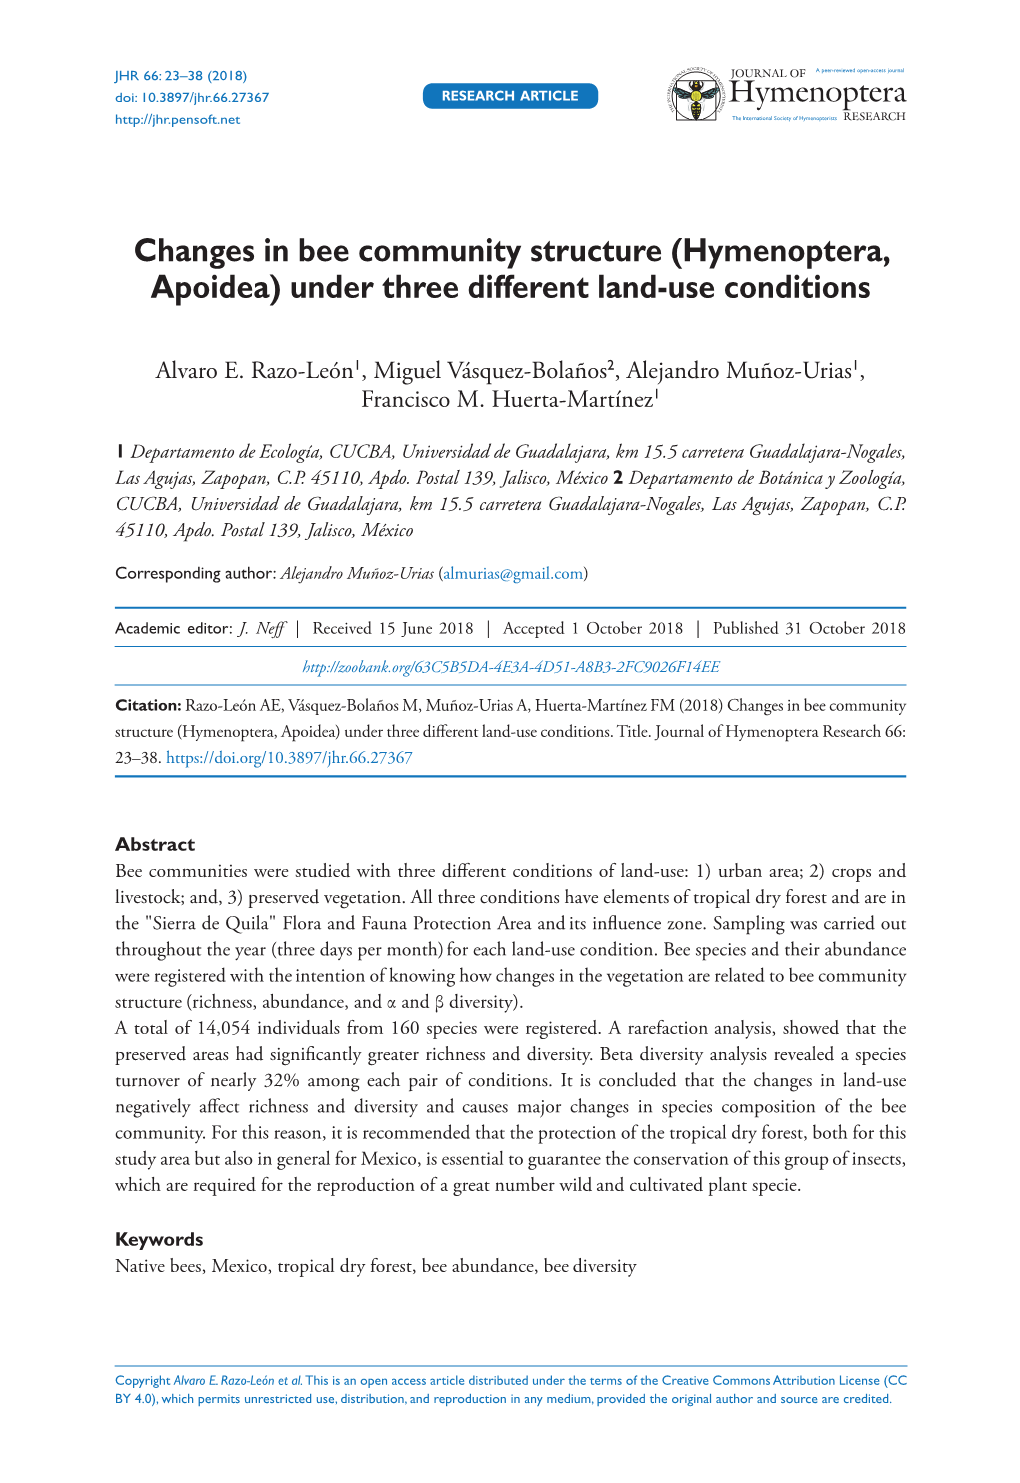 ﻿Changes in Bee Community Structure (Hymenoptera, Apoidea) Under Three Different Land-Use Conditions